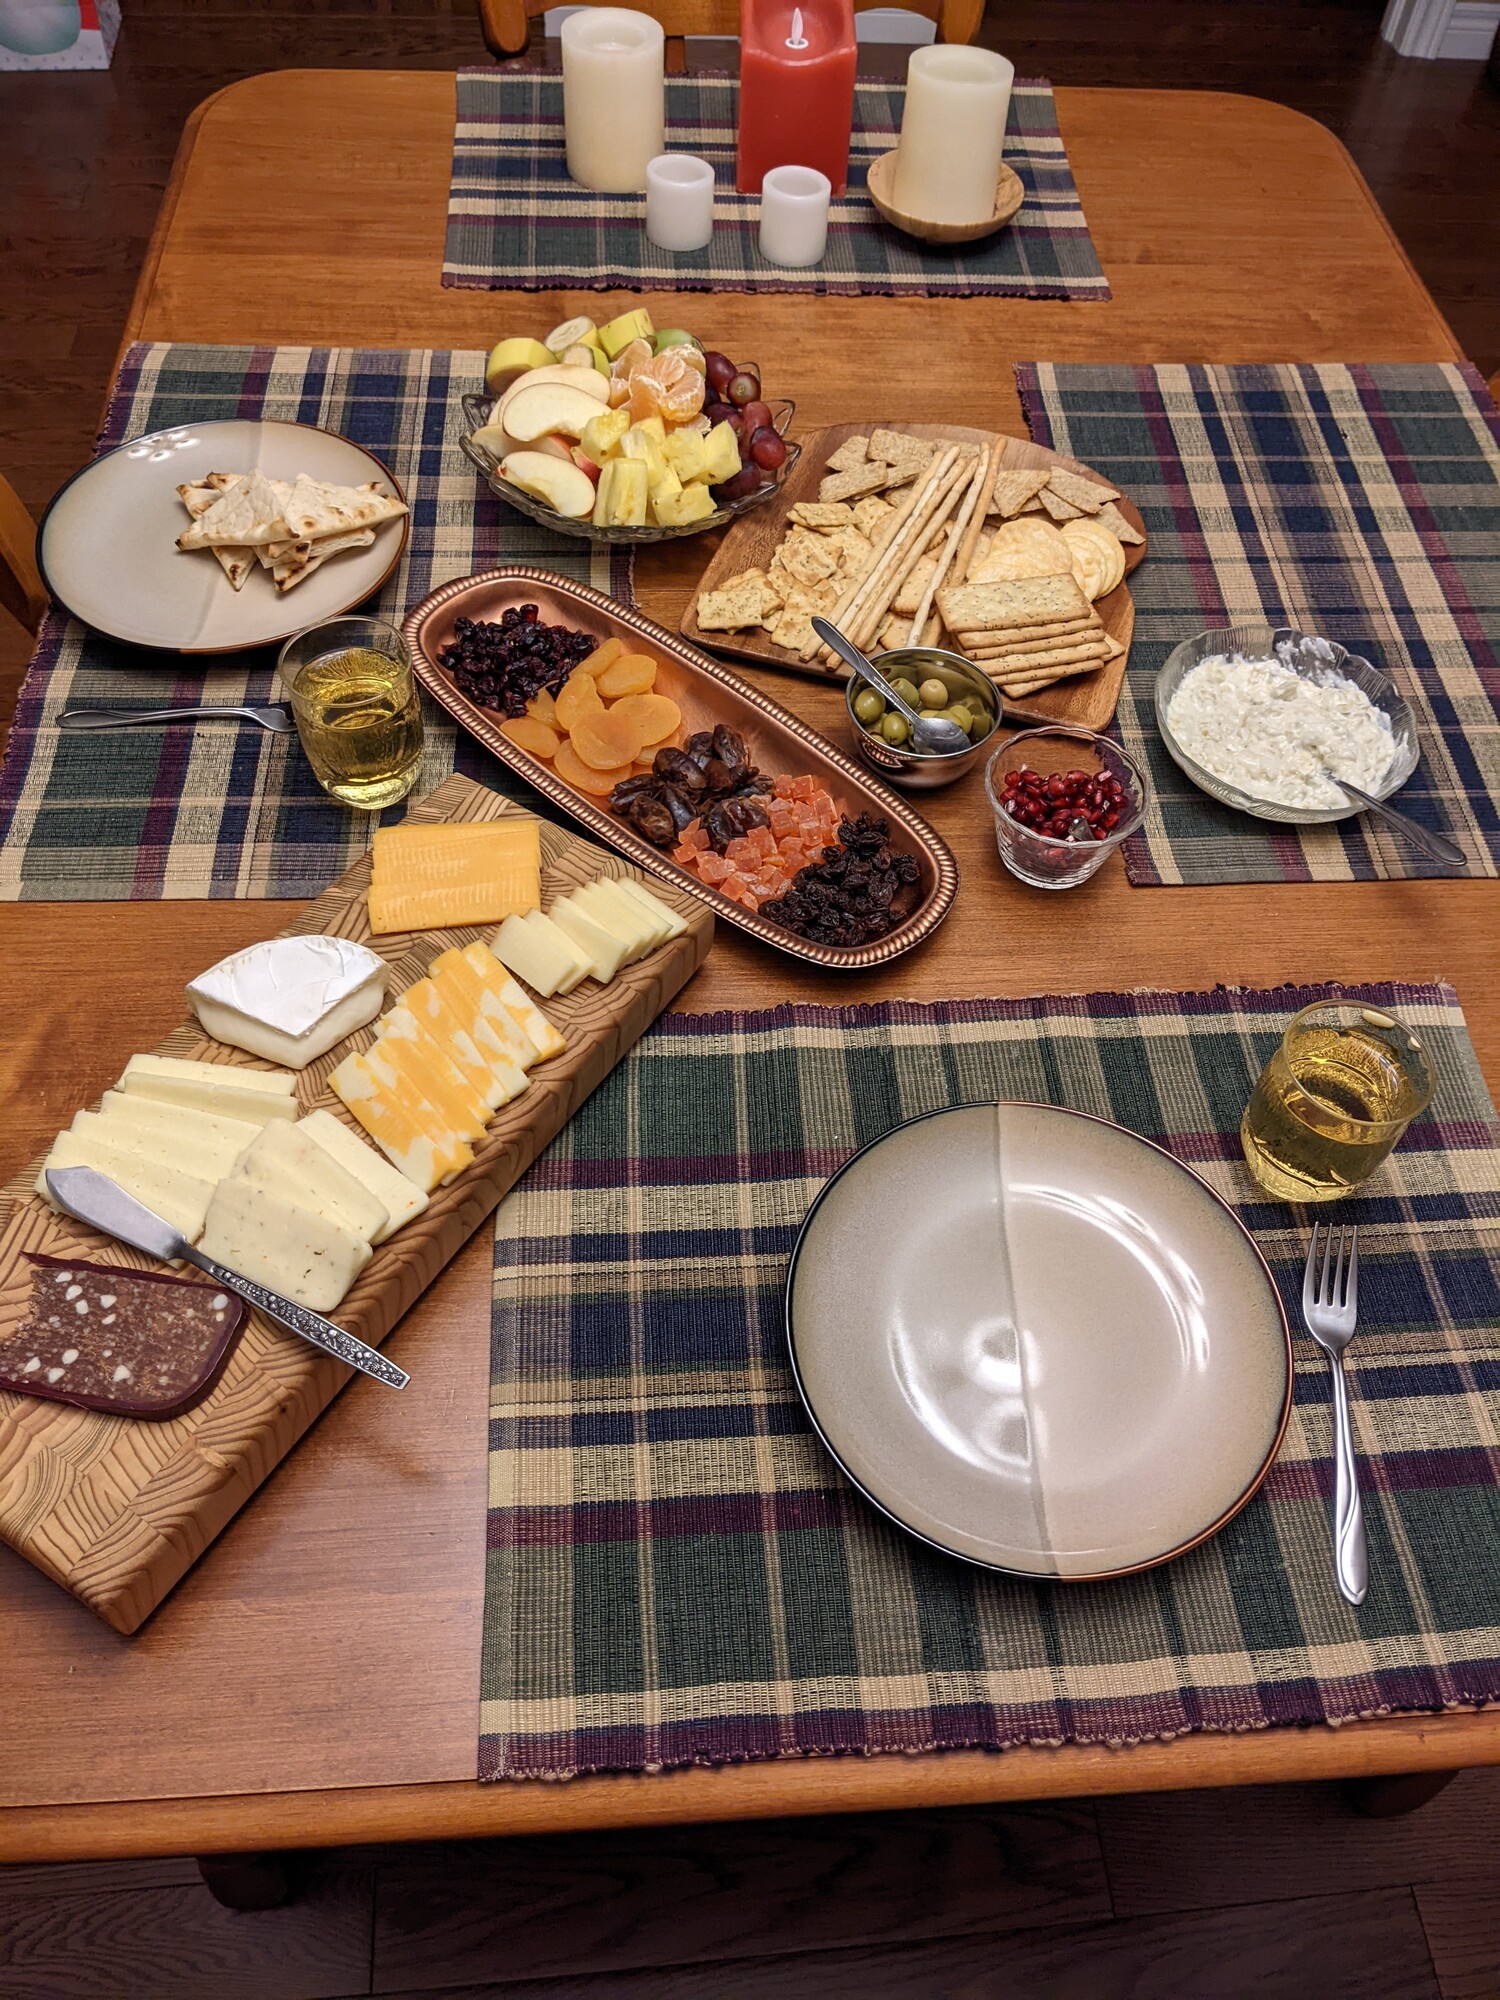 A spread of food on a table